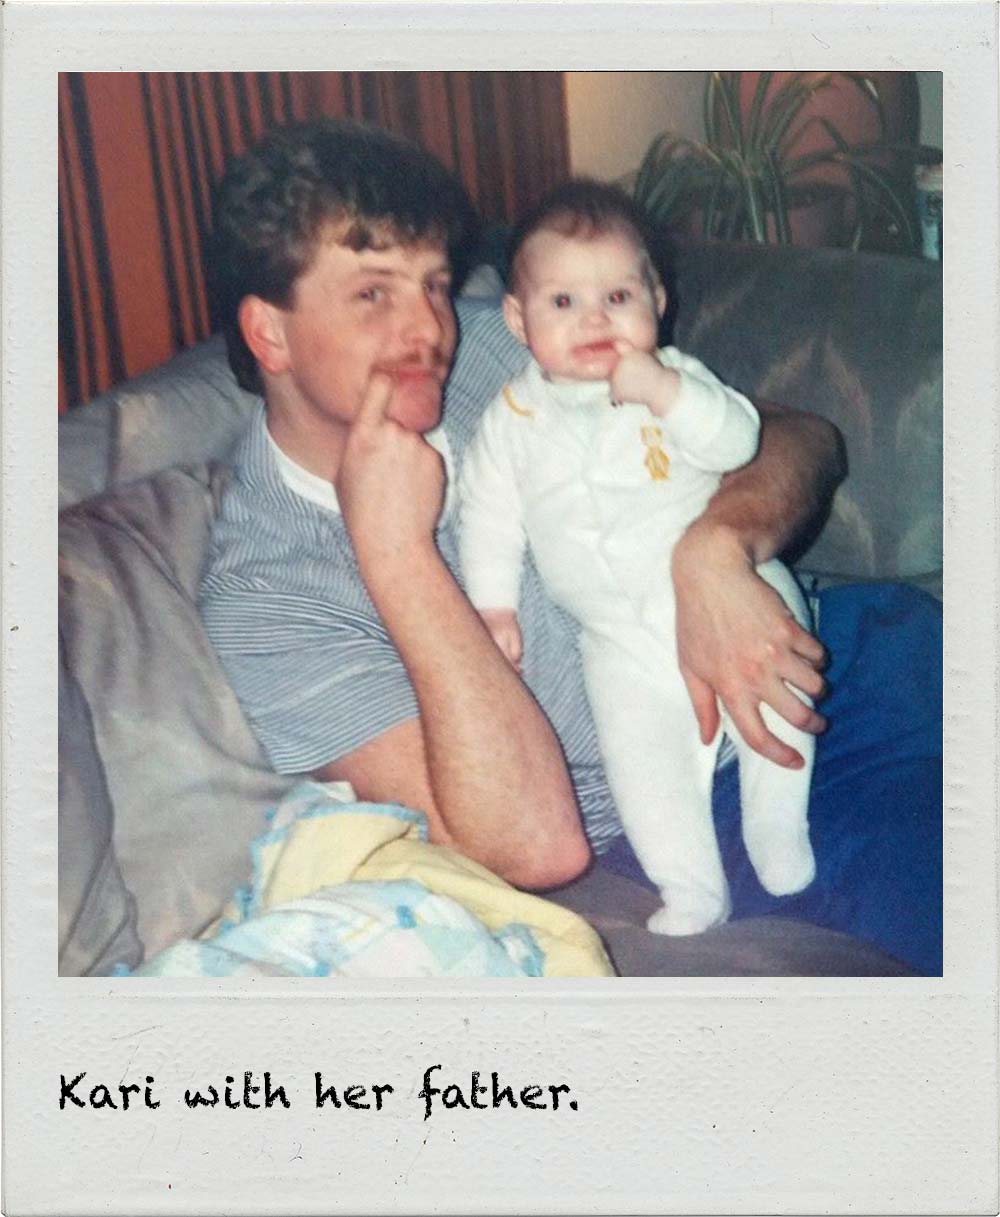 Kari with her father